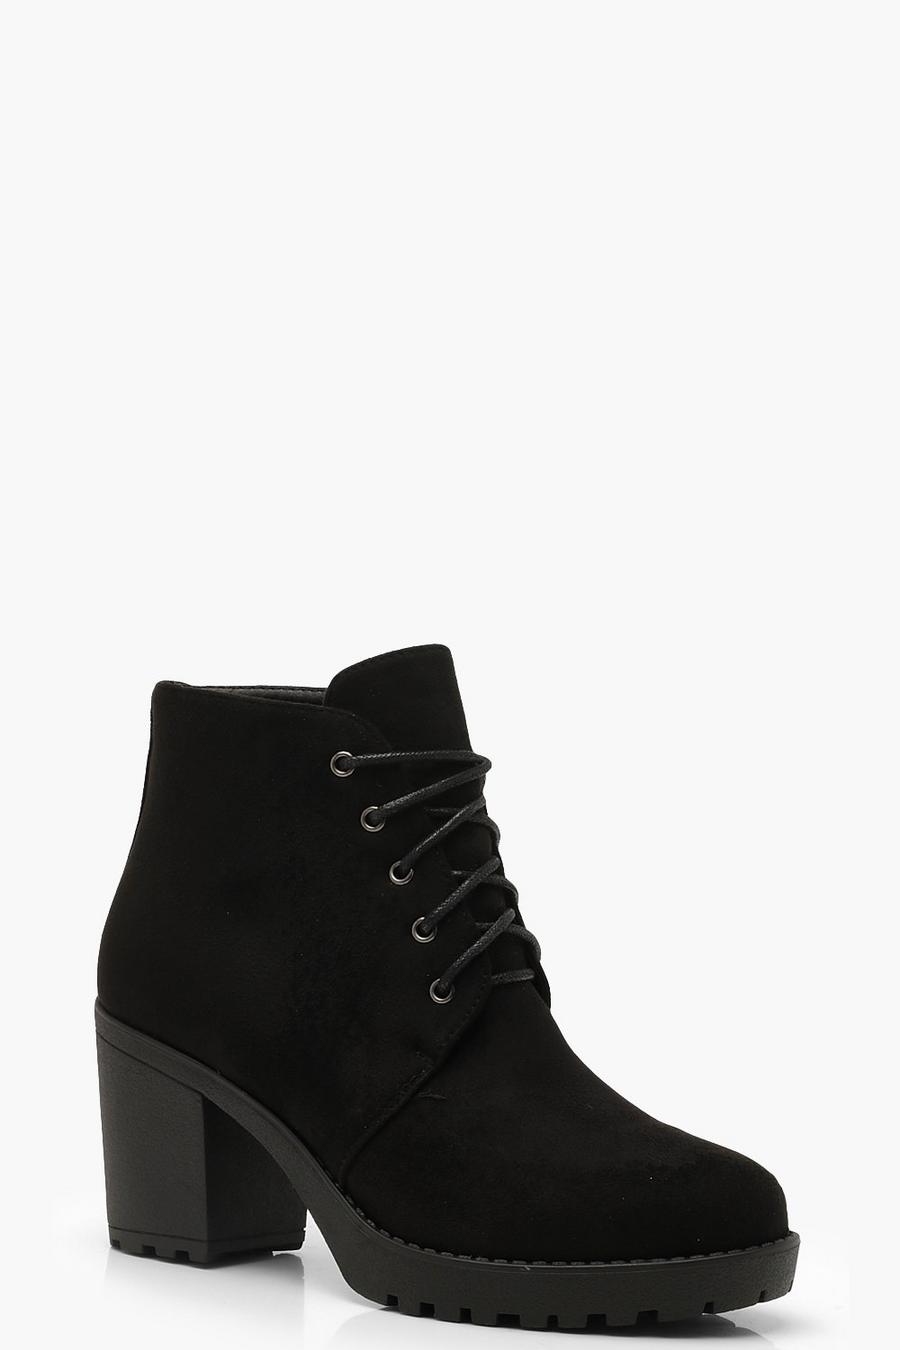 Black Lace Up Chunky Heel Hiker Boots image number 1